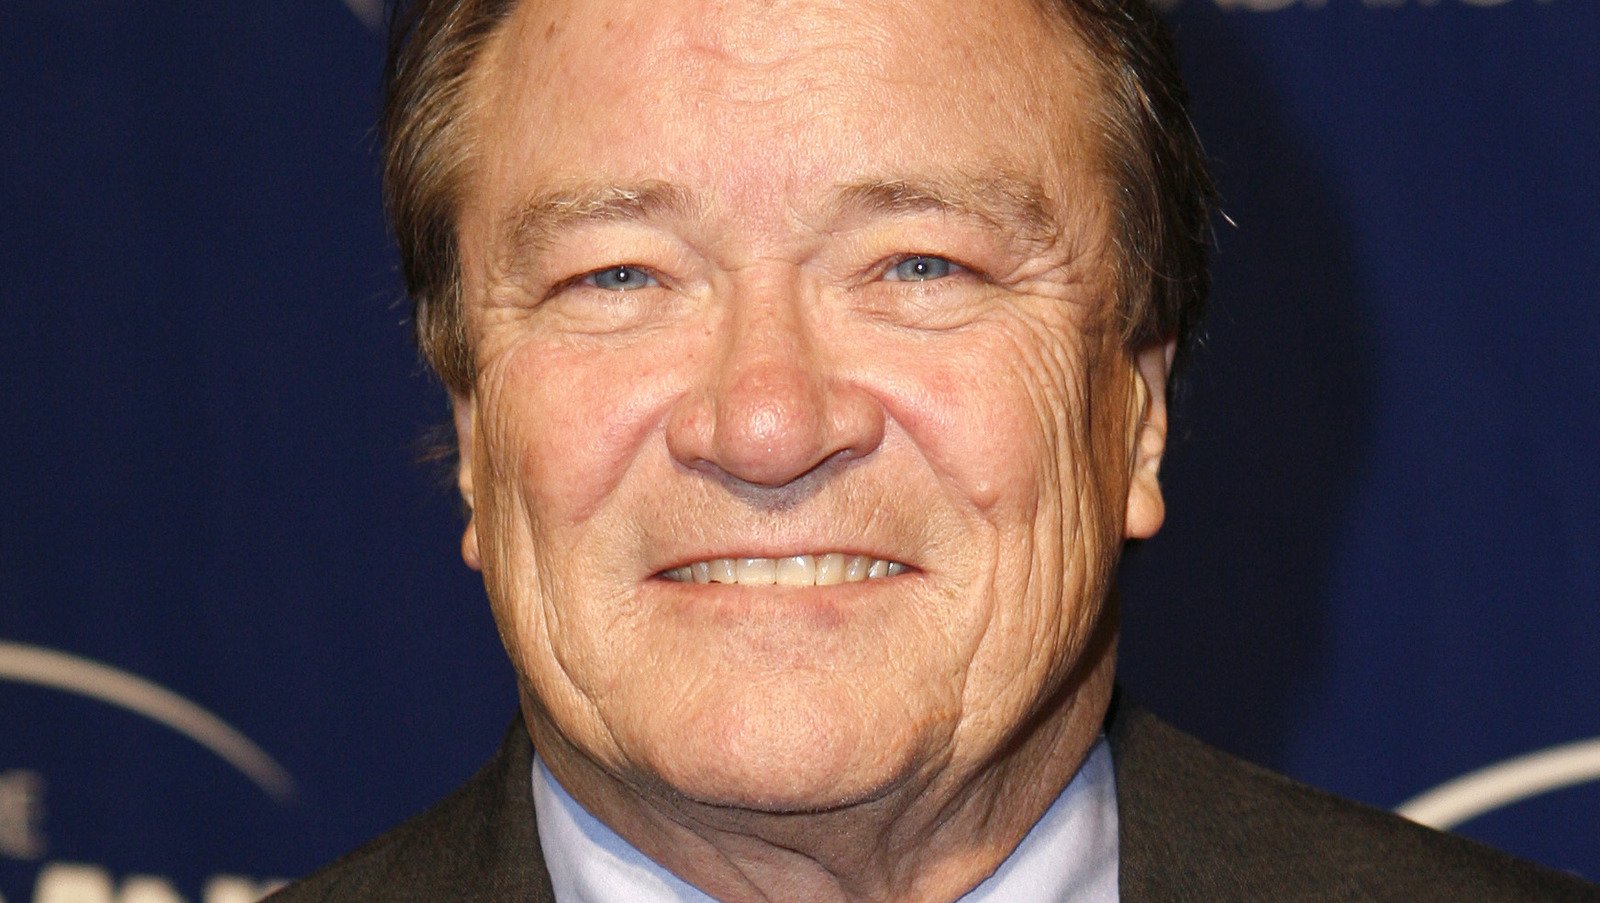 The Real Reason Steve Kroft Left 60 Minutes After 30 Years - Looper